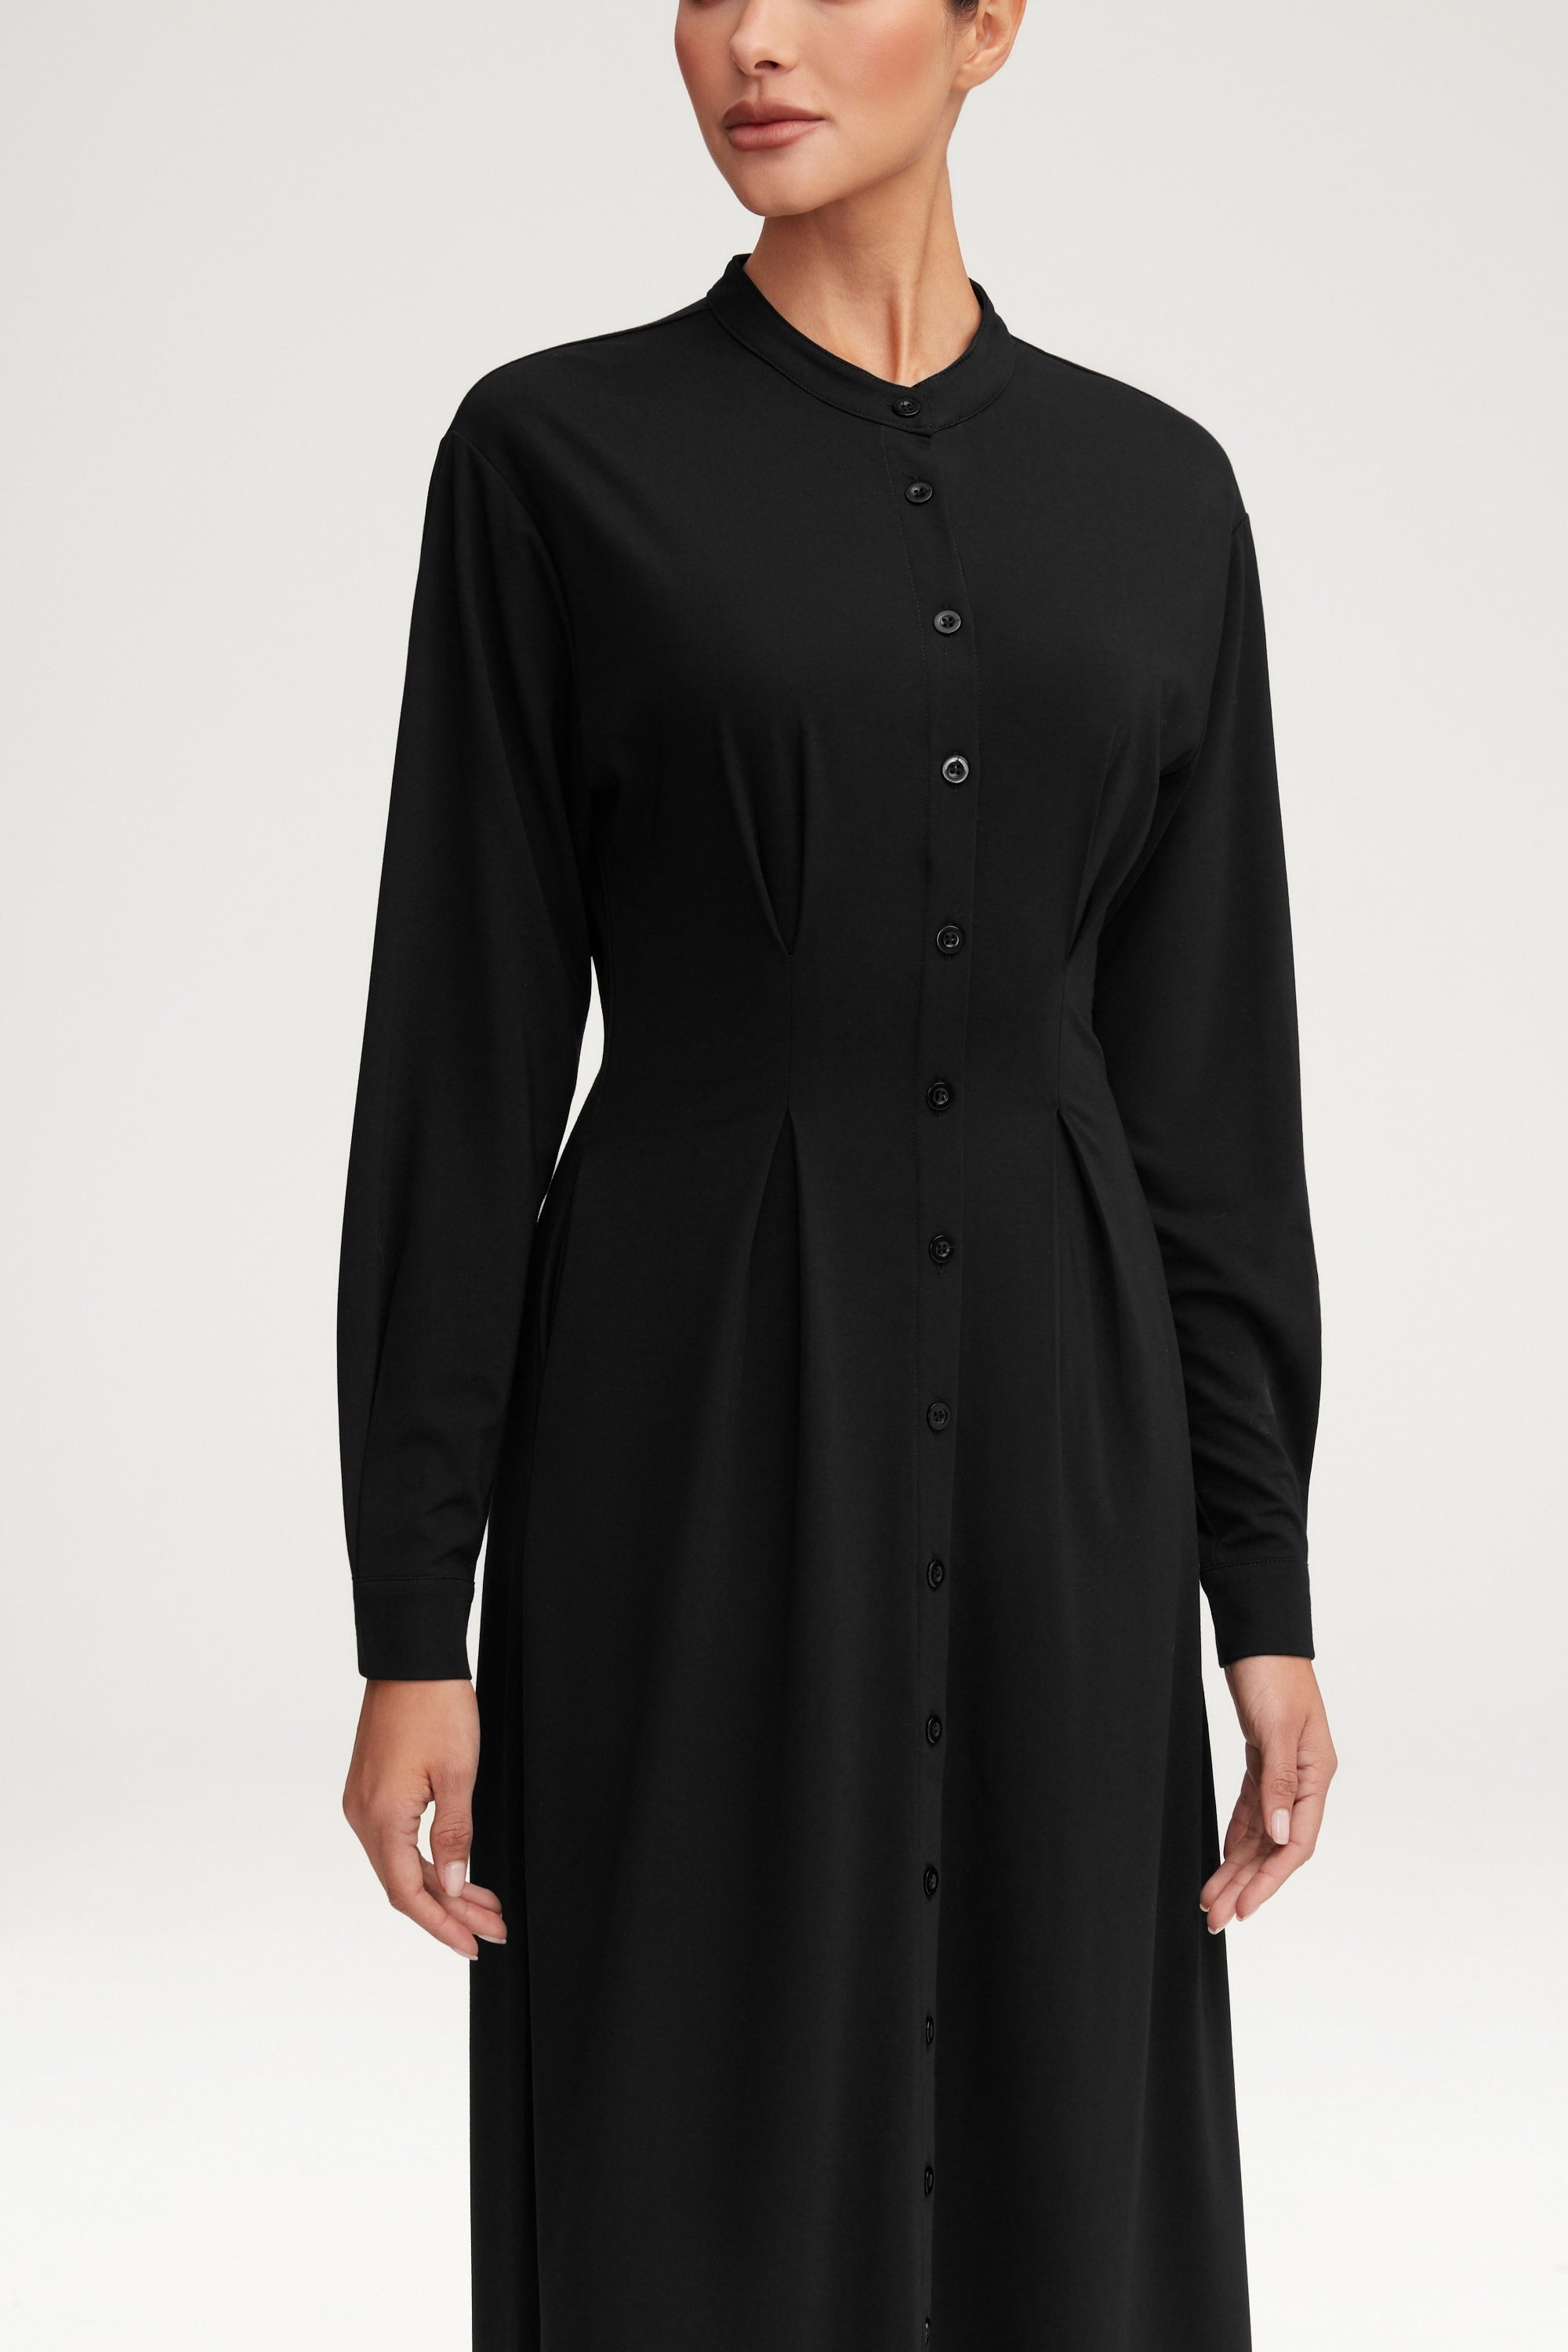 Ivy Jersey Button Down Maxi Dress - Black Clothing Veiled 